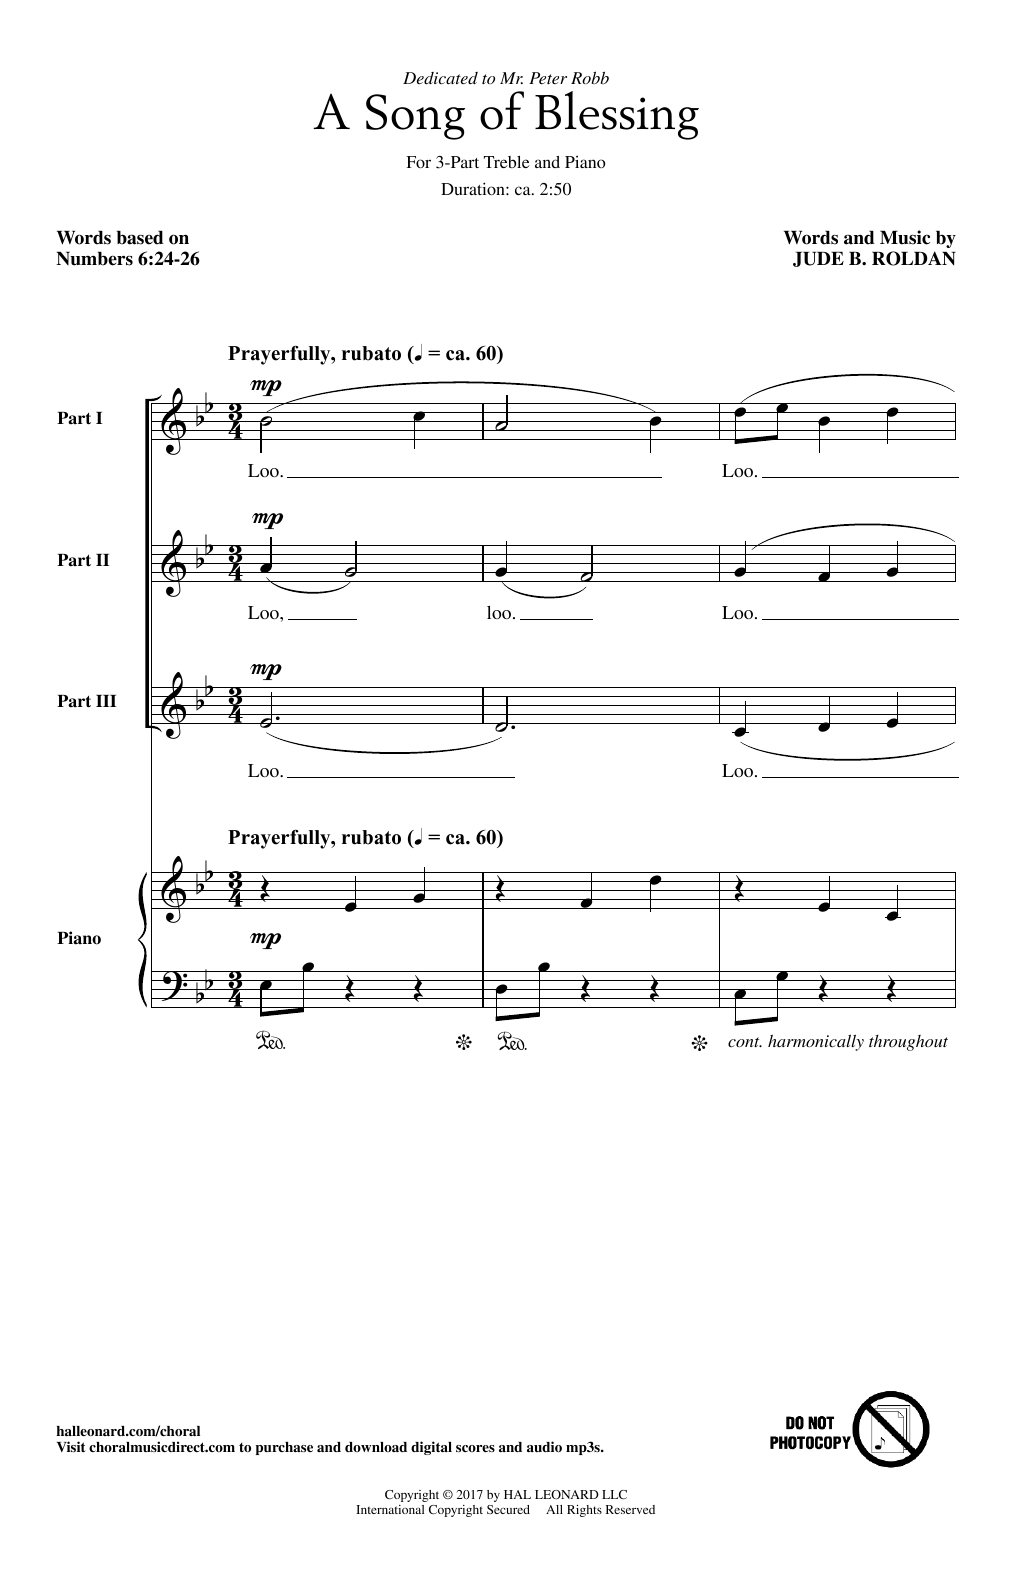 Jude Roldan A Song Of Blessing sheet music notes printable PDF score